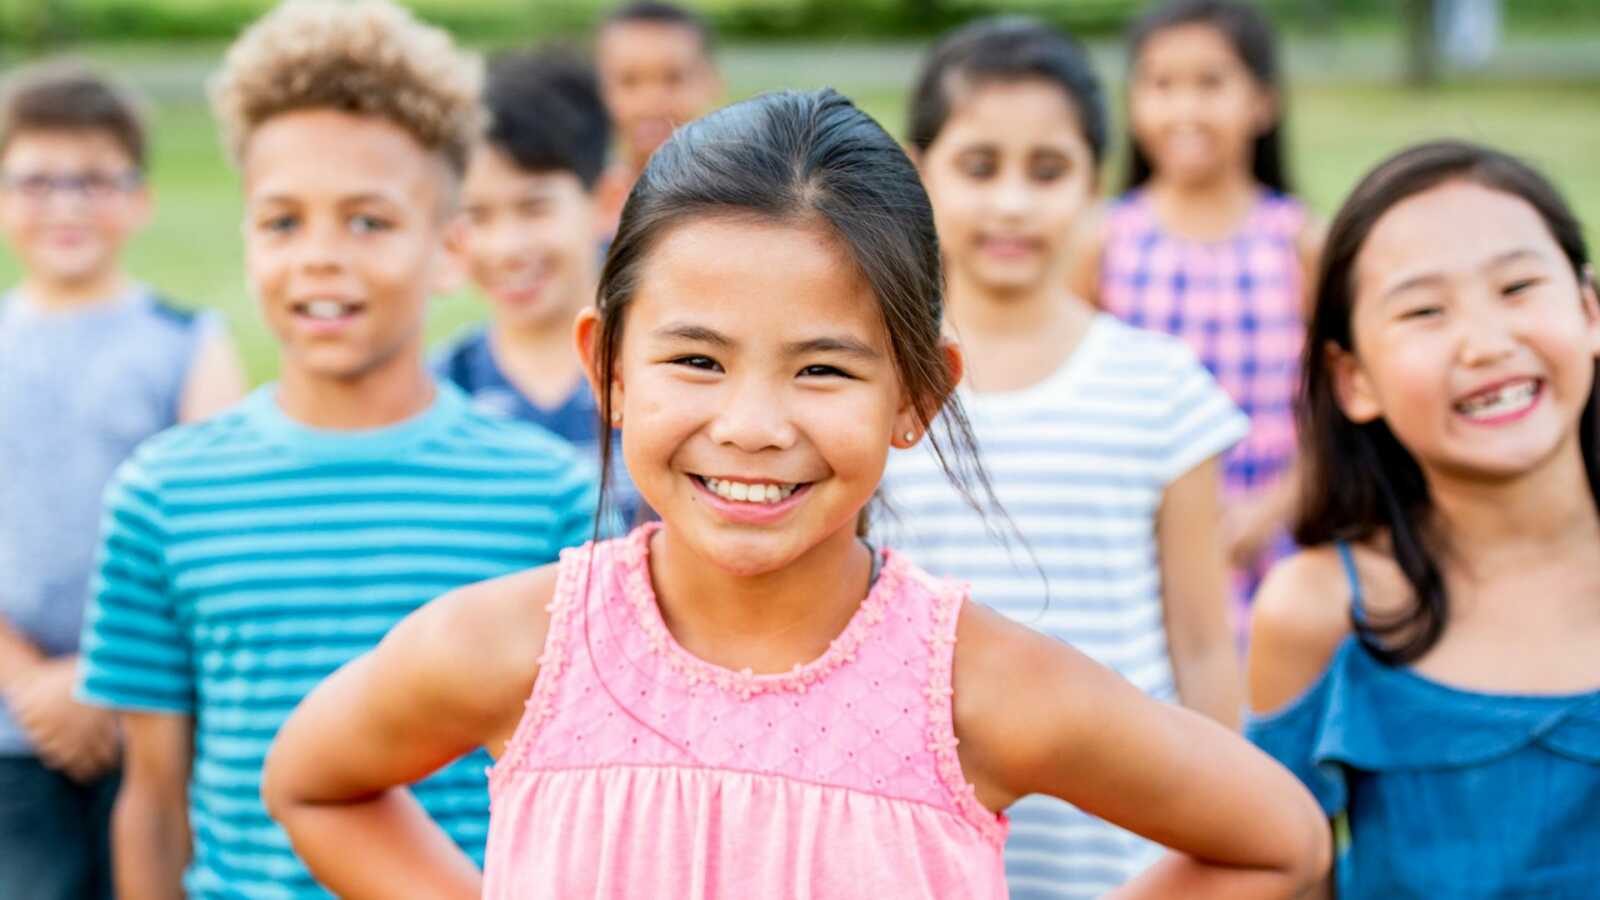 A young Asian girl stands in front of a group of diverse children with her hands on her hips and a confident smile.